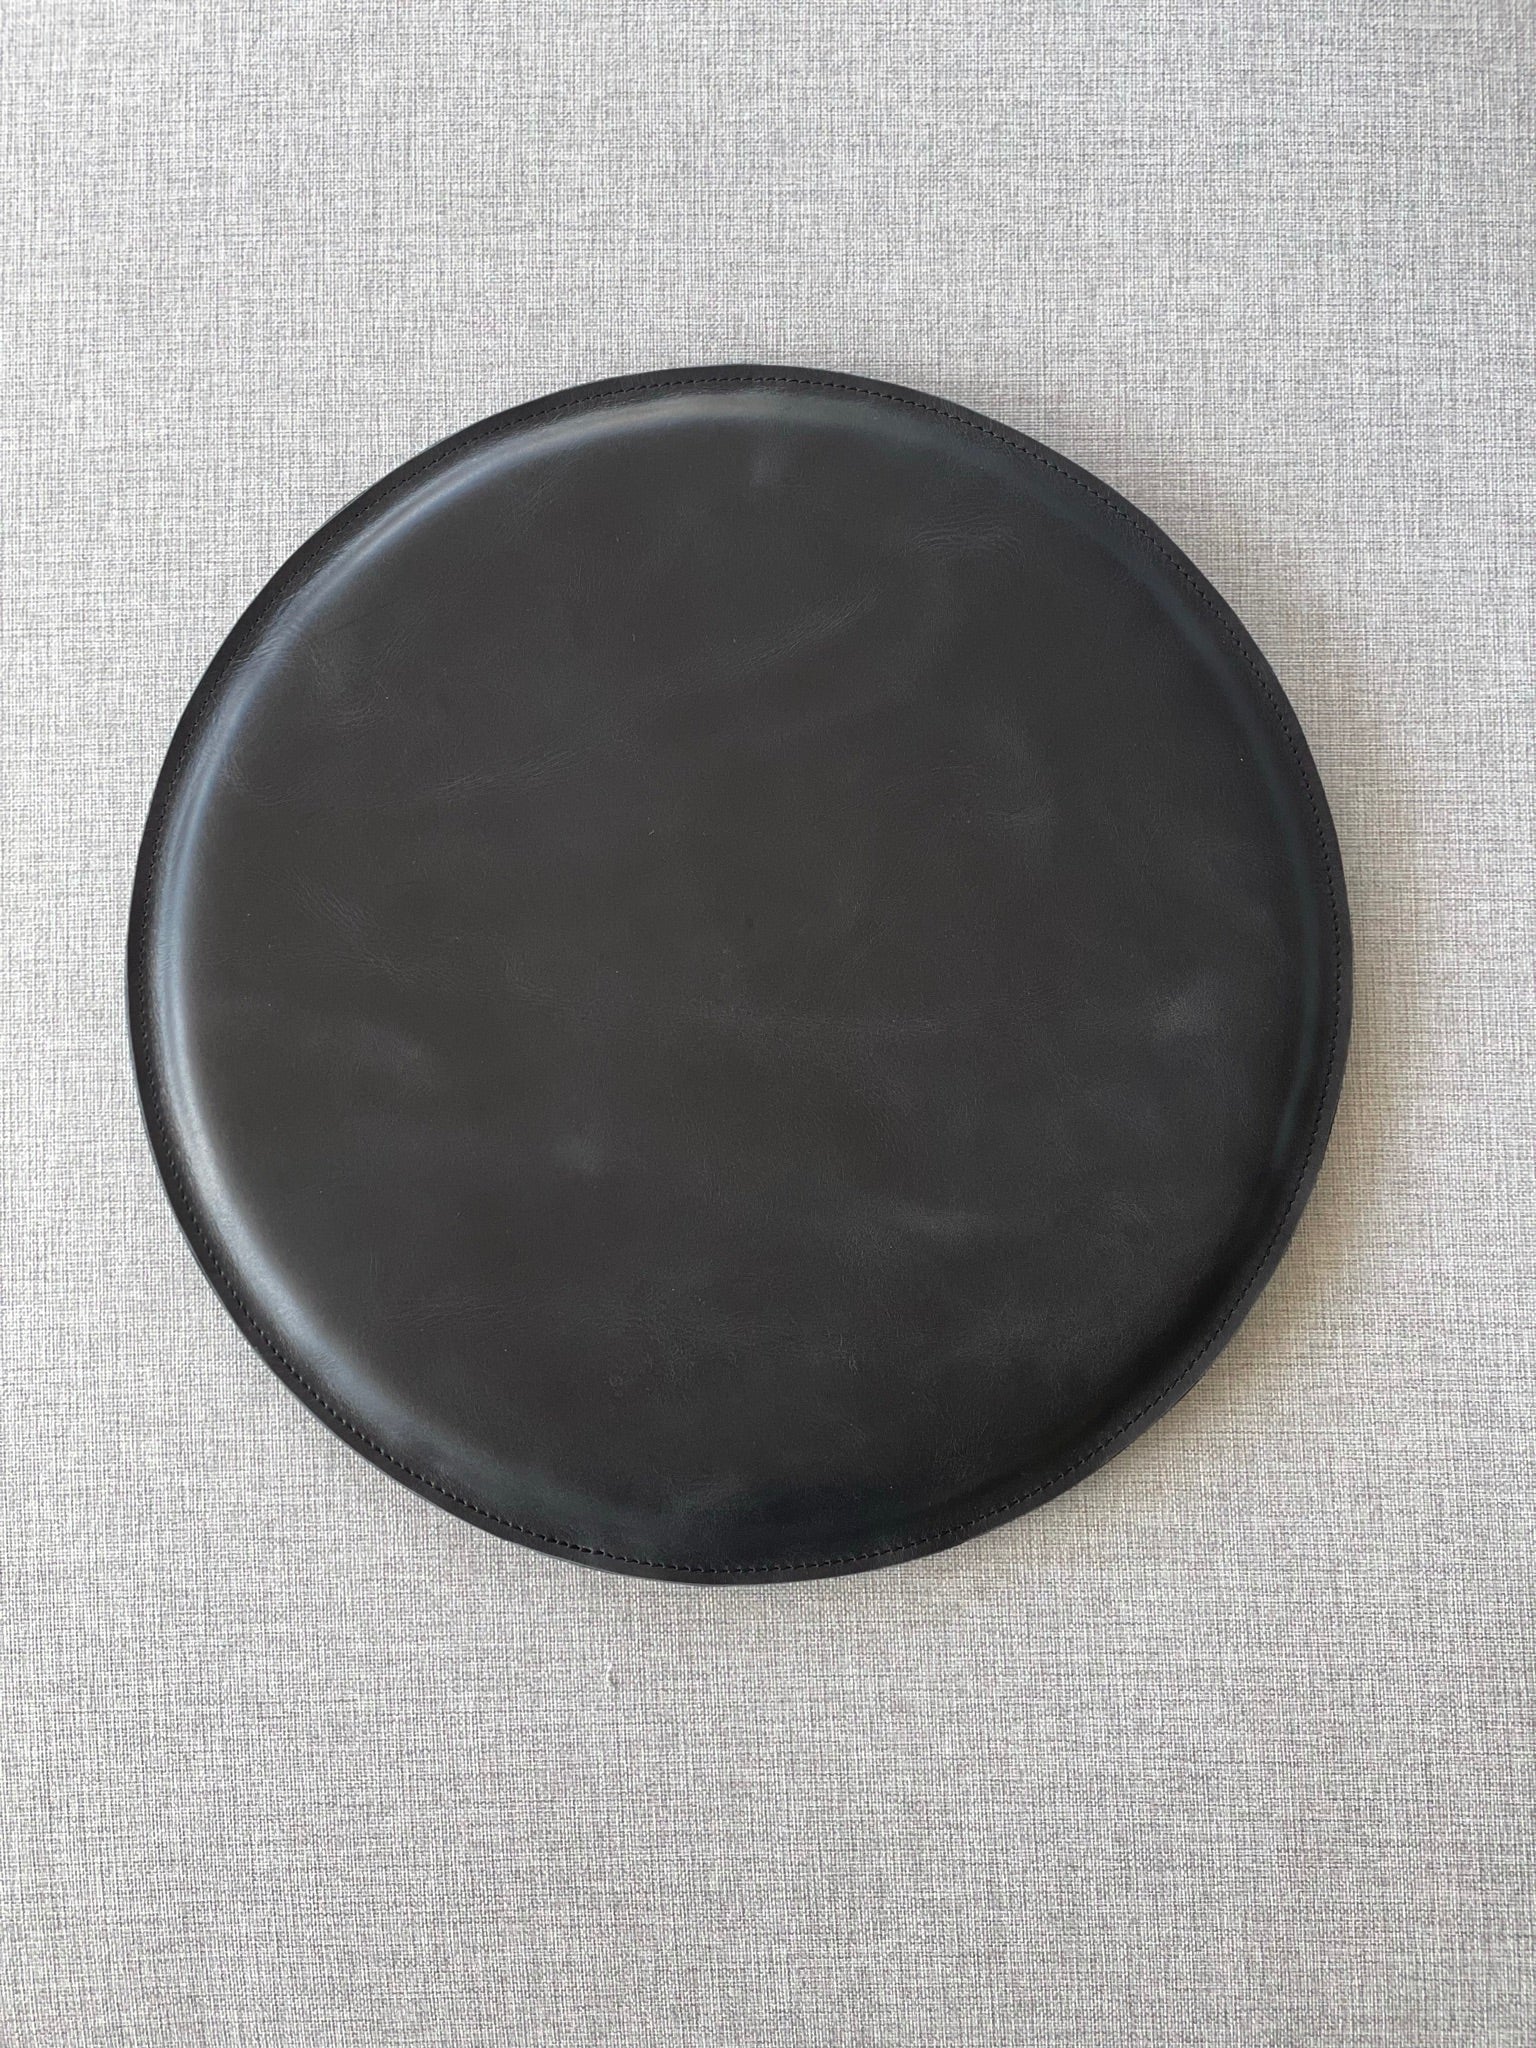 Cover. Leather Round Cushion Black by Modoun Home Decor